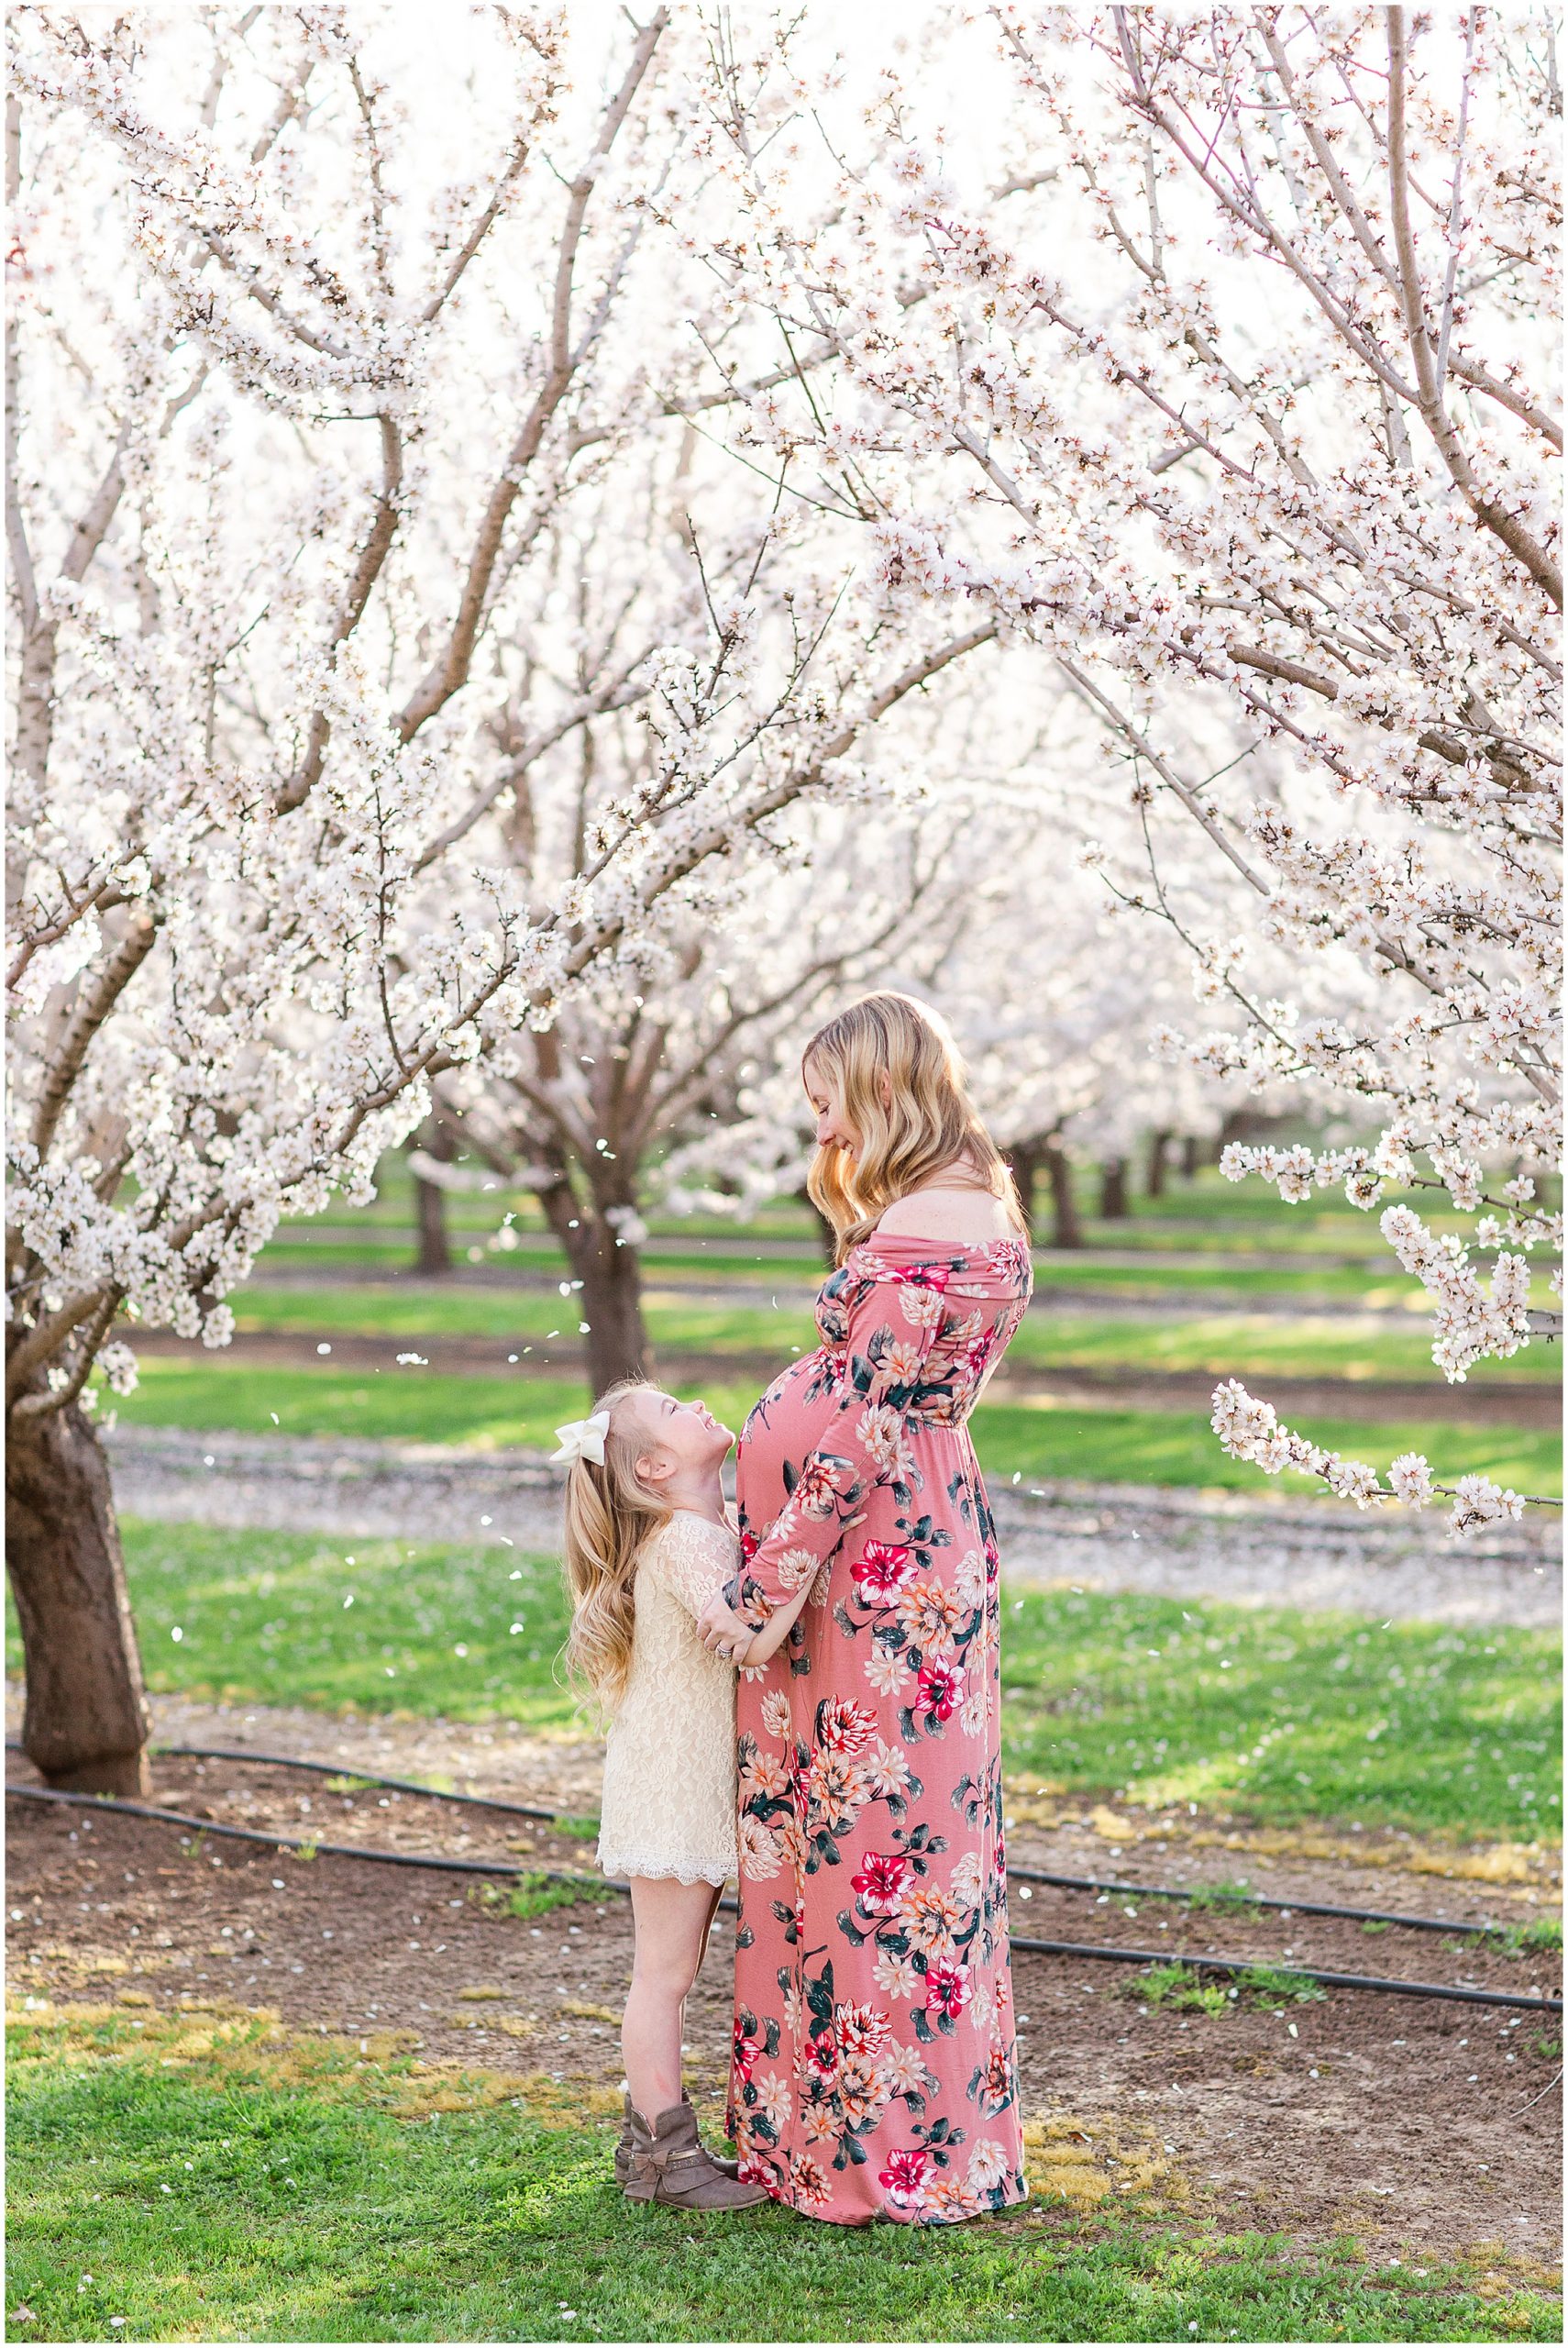 Blossoms Falling on Mom and Big Sister | Sammy + Aden Maternity